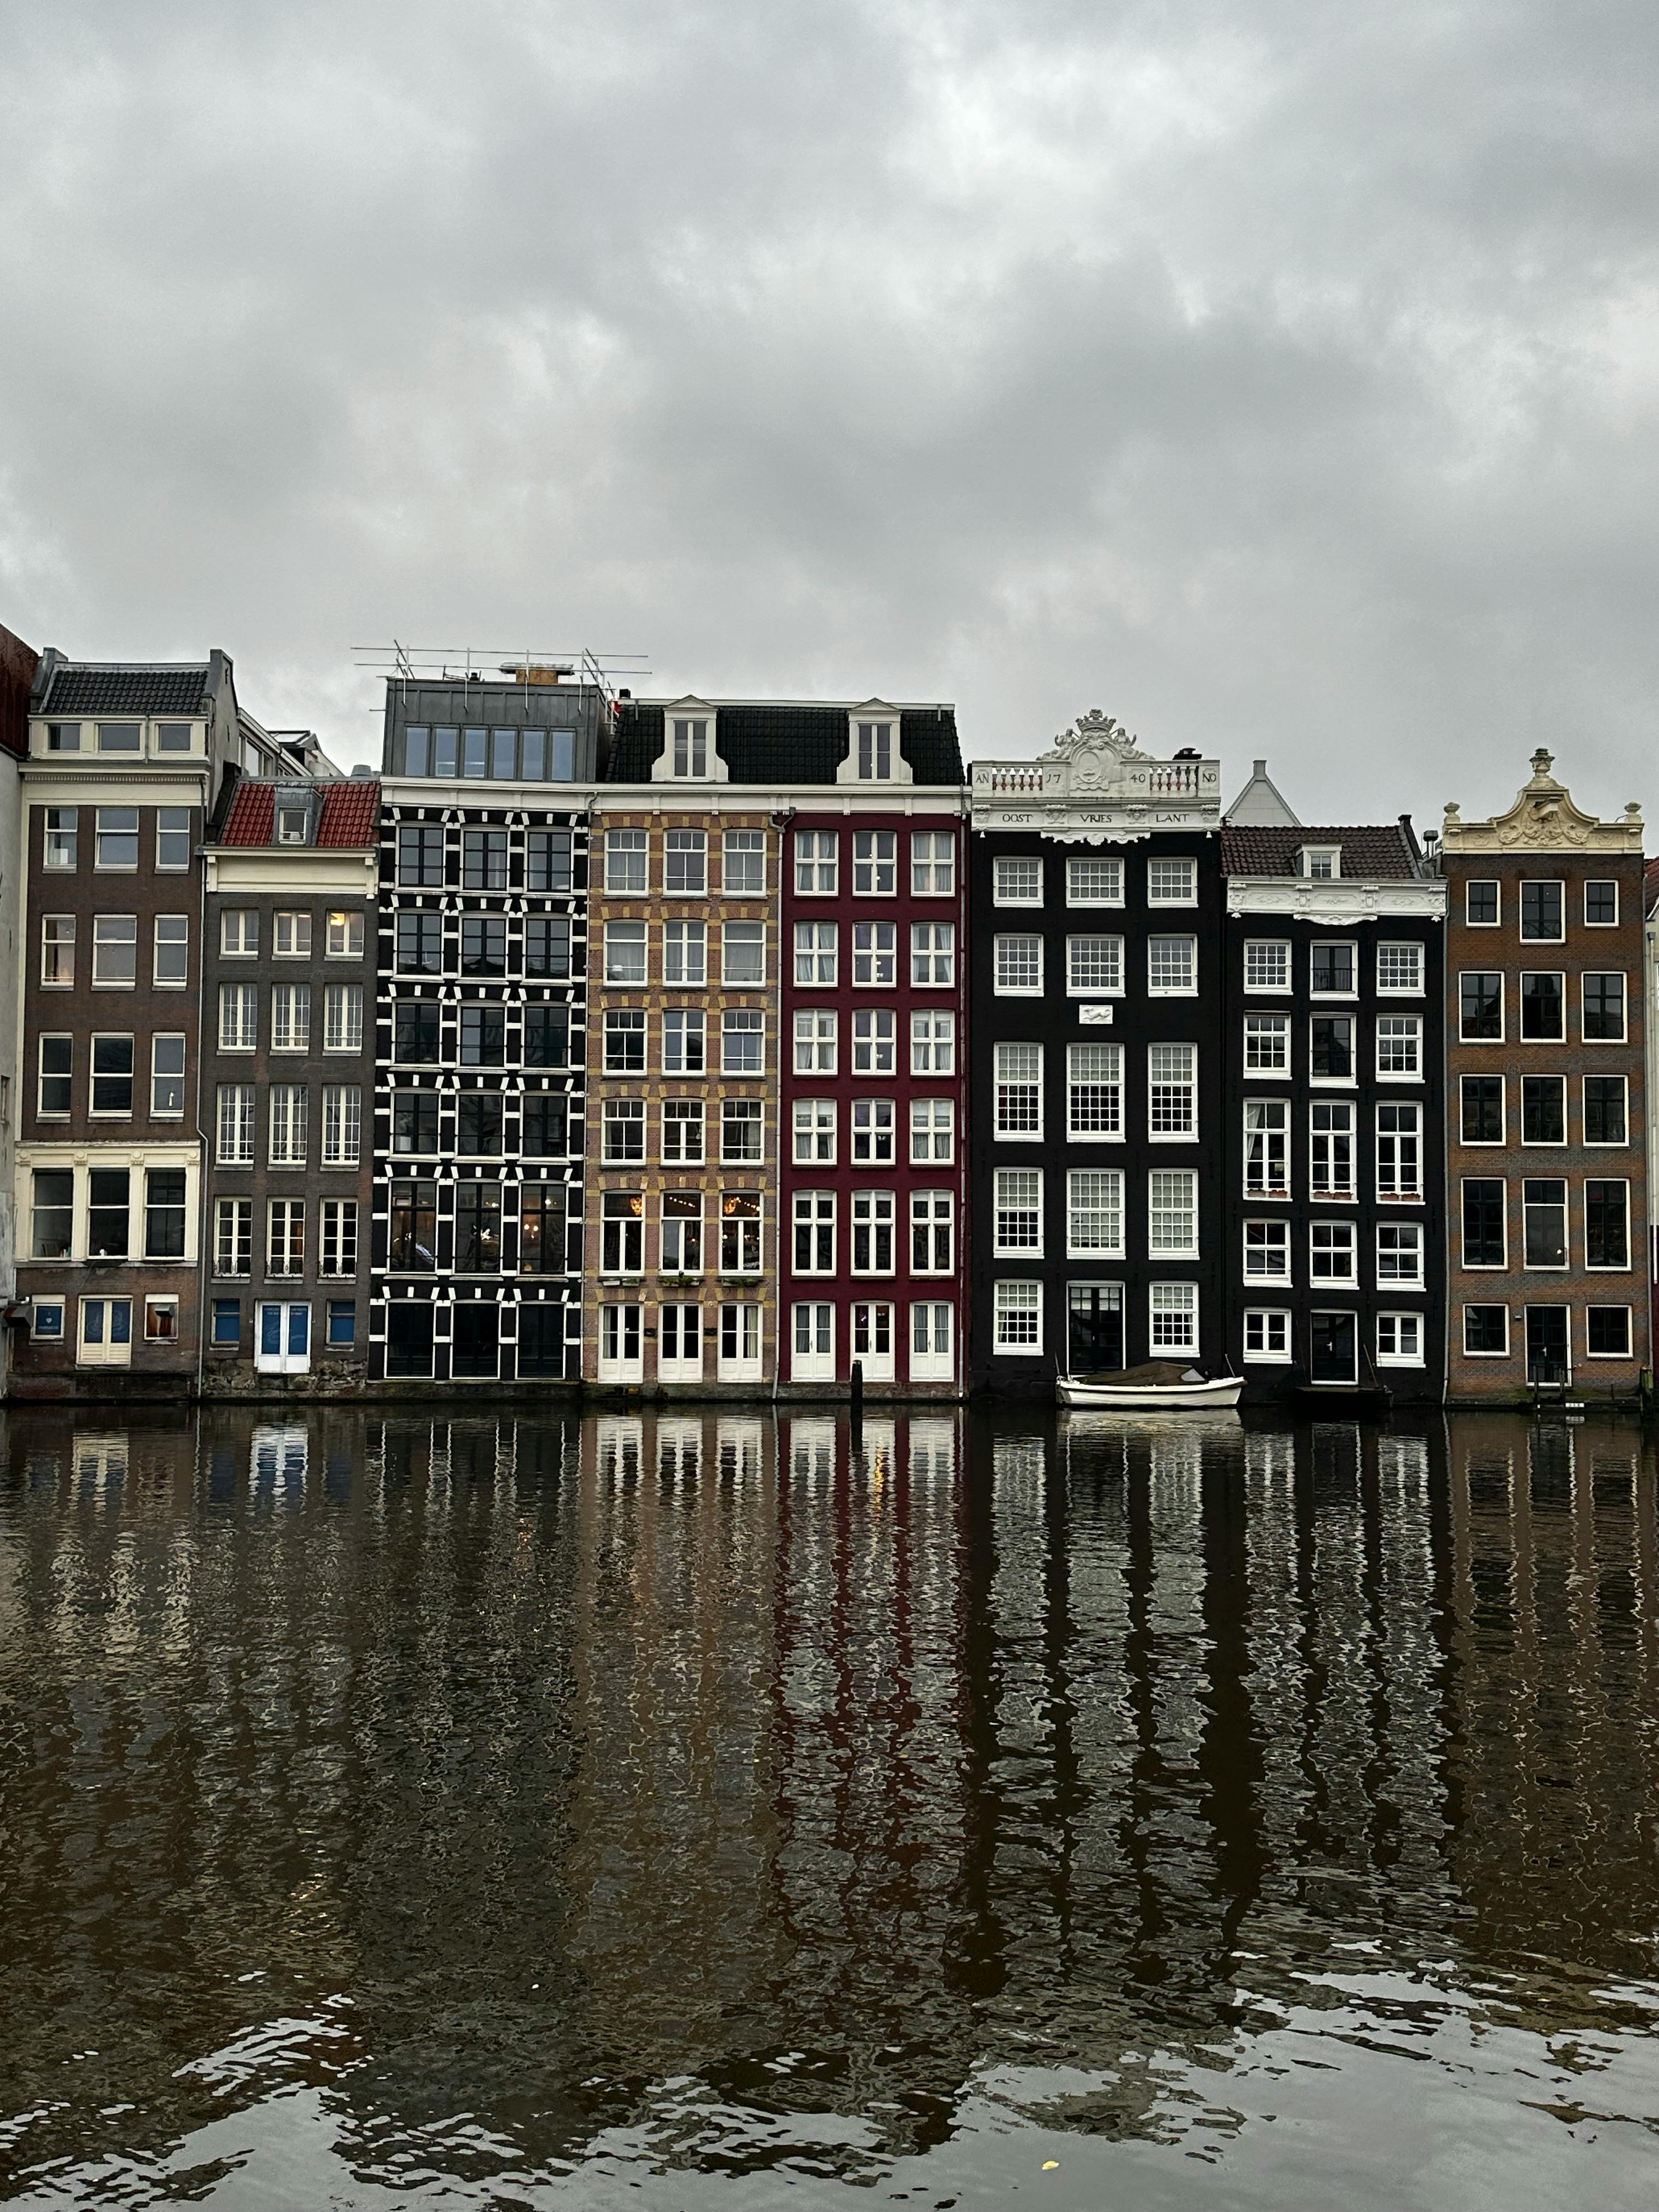 facade of tenements by canal in amsterdam